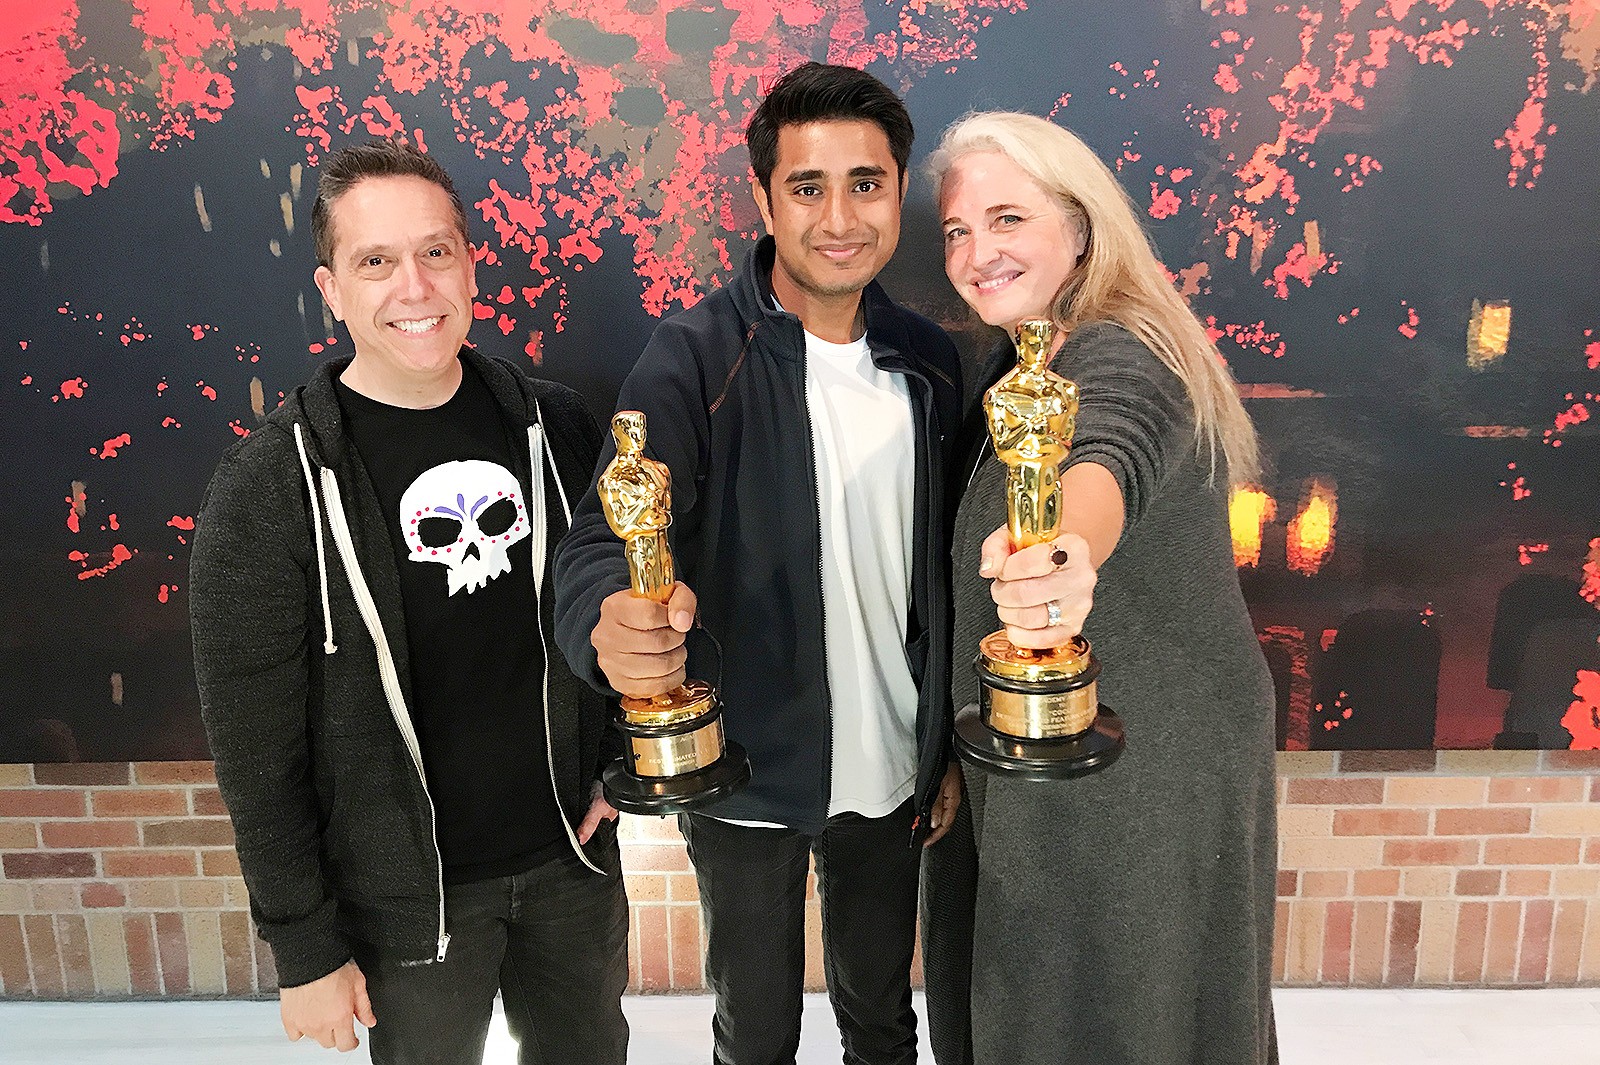 Mr Harsh Agrawal, a graduate of the School of Creative Media, was a member of the animation team for the film Coco, which won the Oscar for Best Animated Feature this year. 